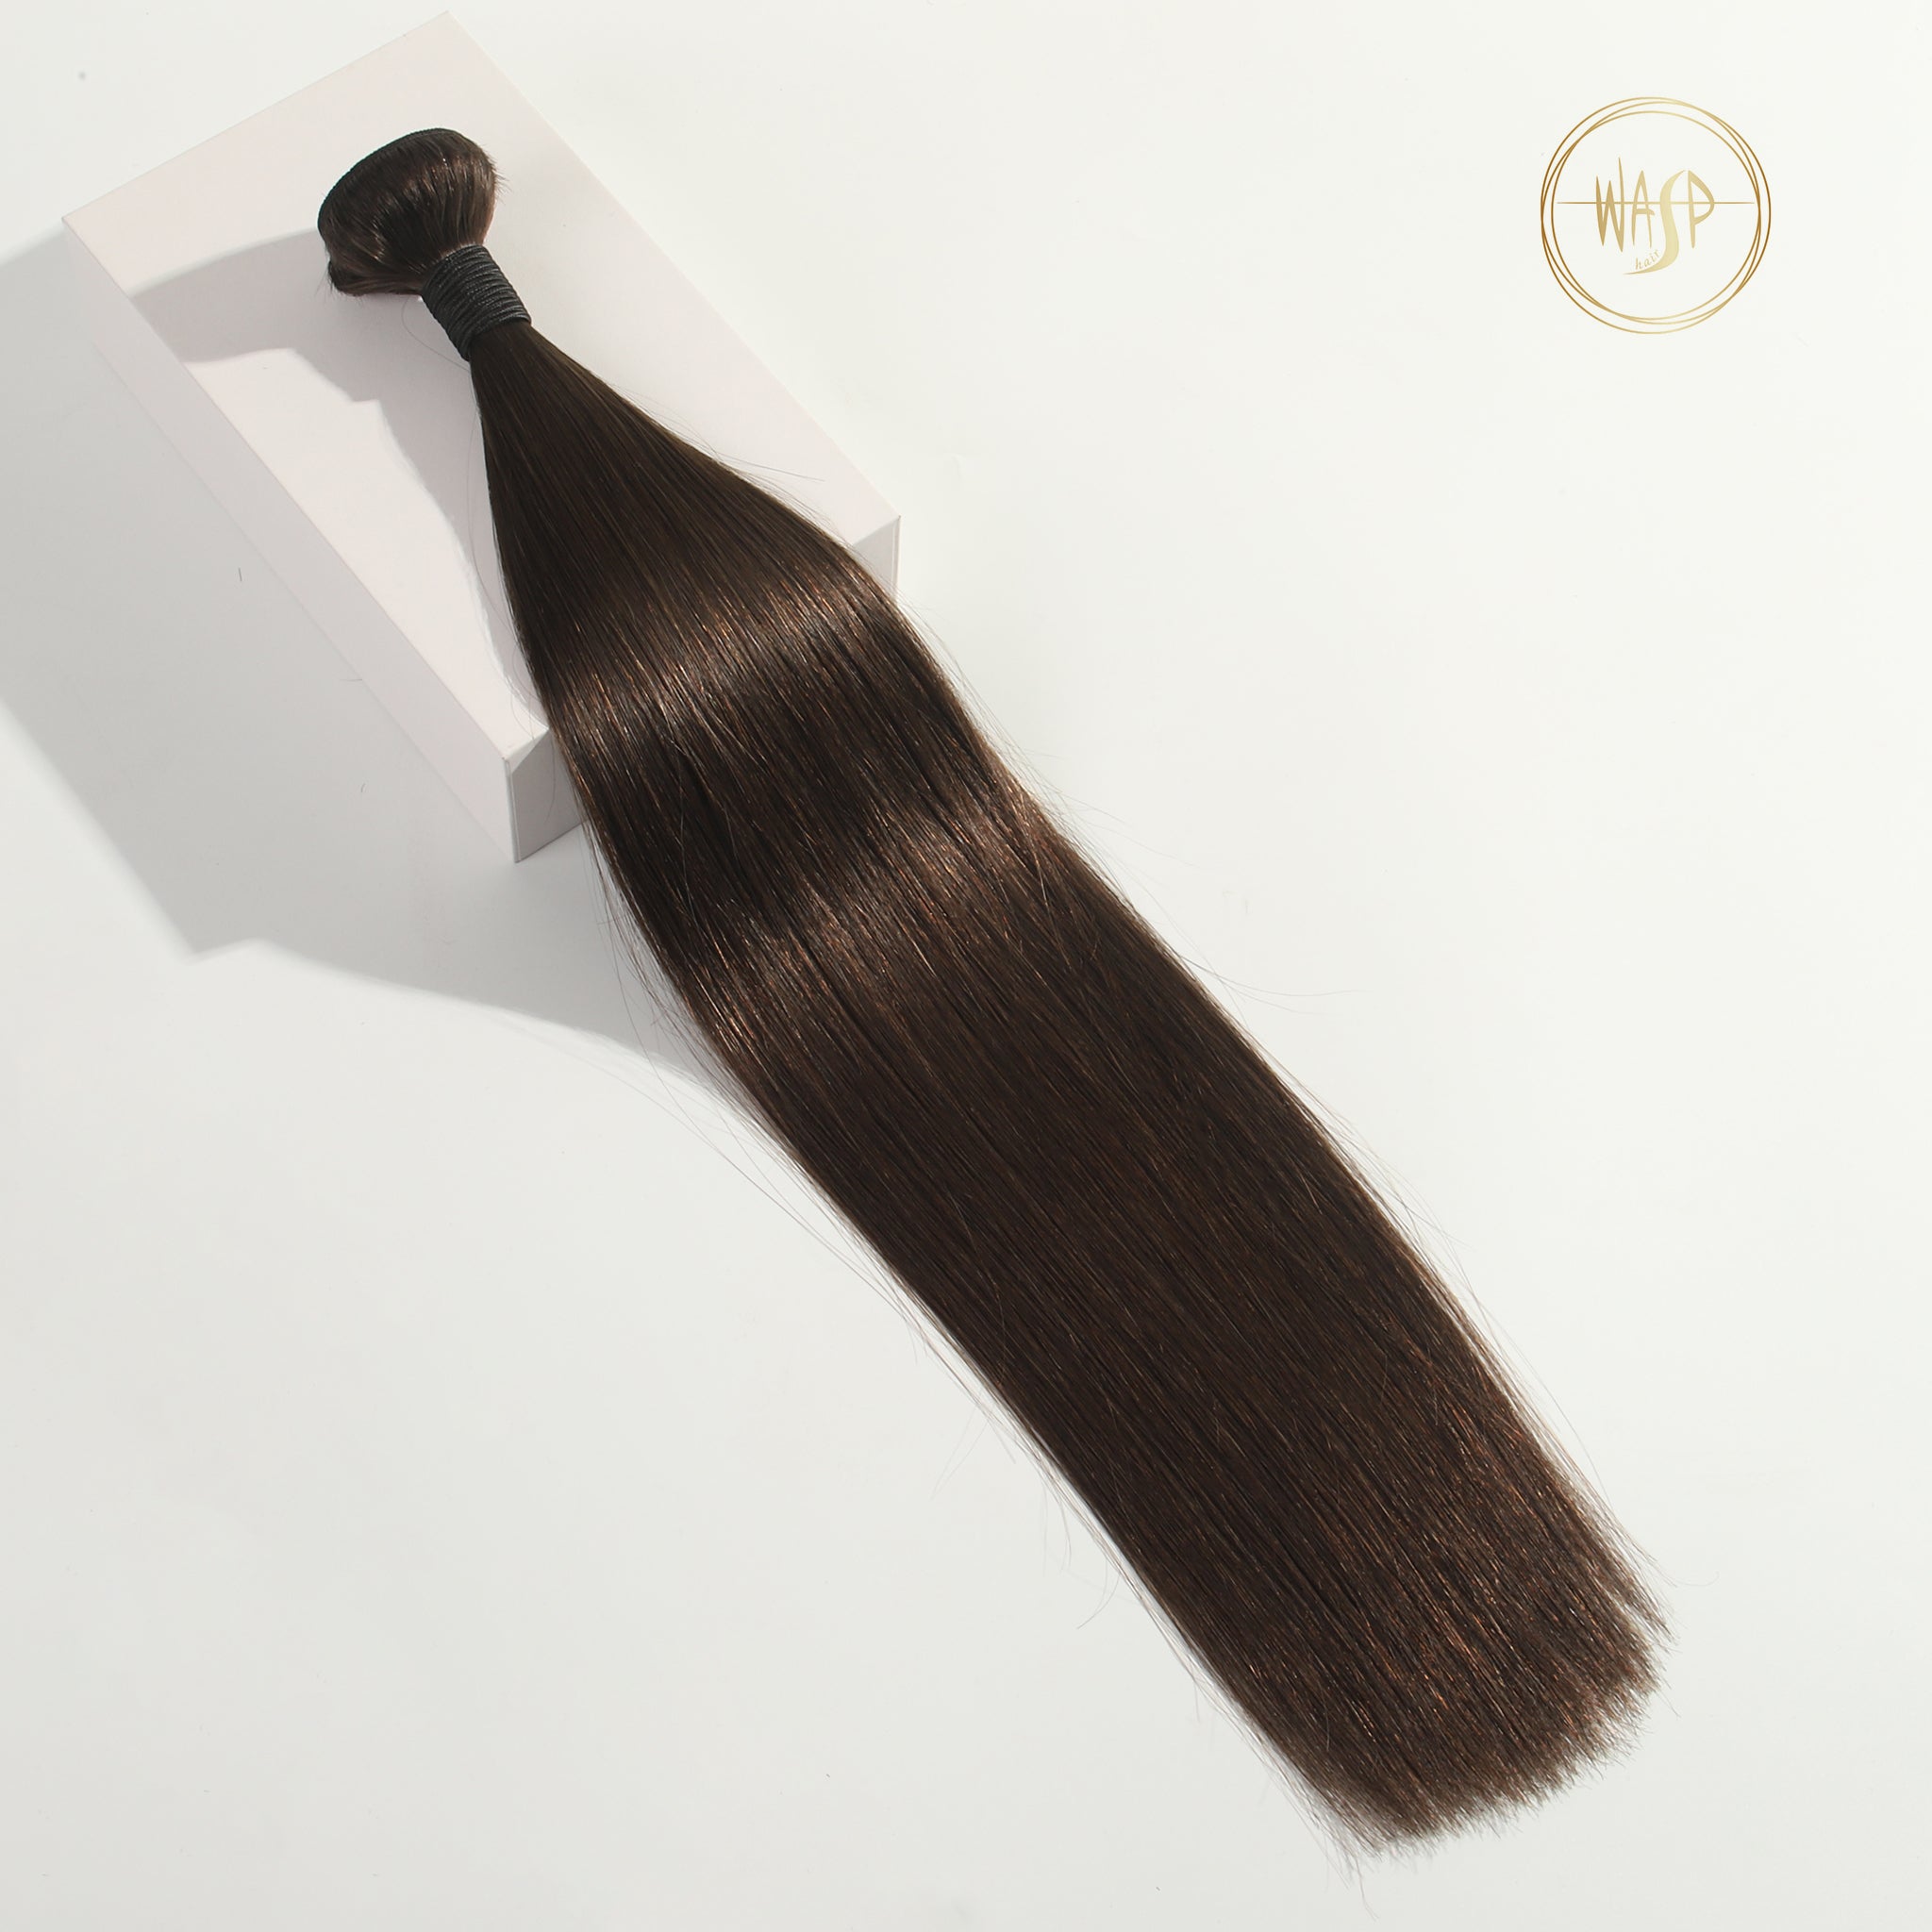 18"  10A  GRADE  WEFT HAIR EXTENSIONS DELUXE BOX